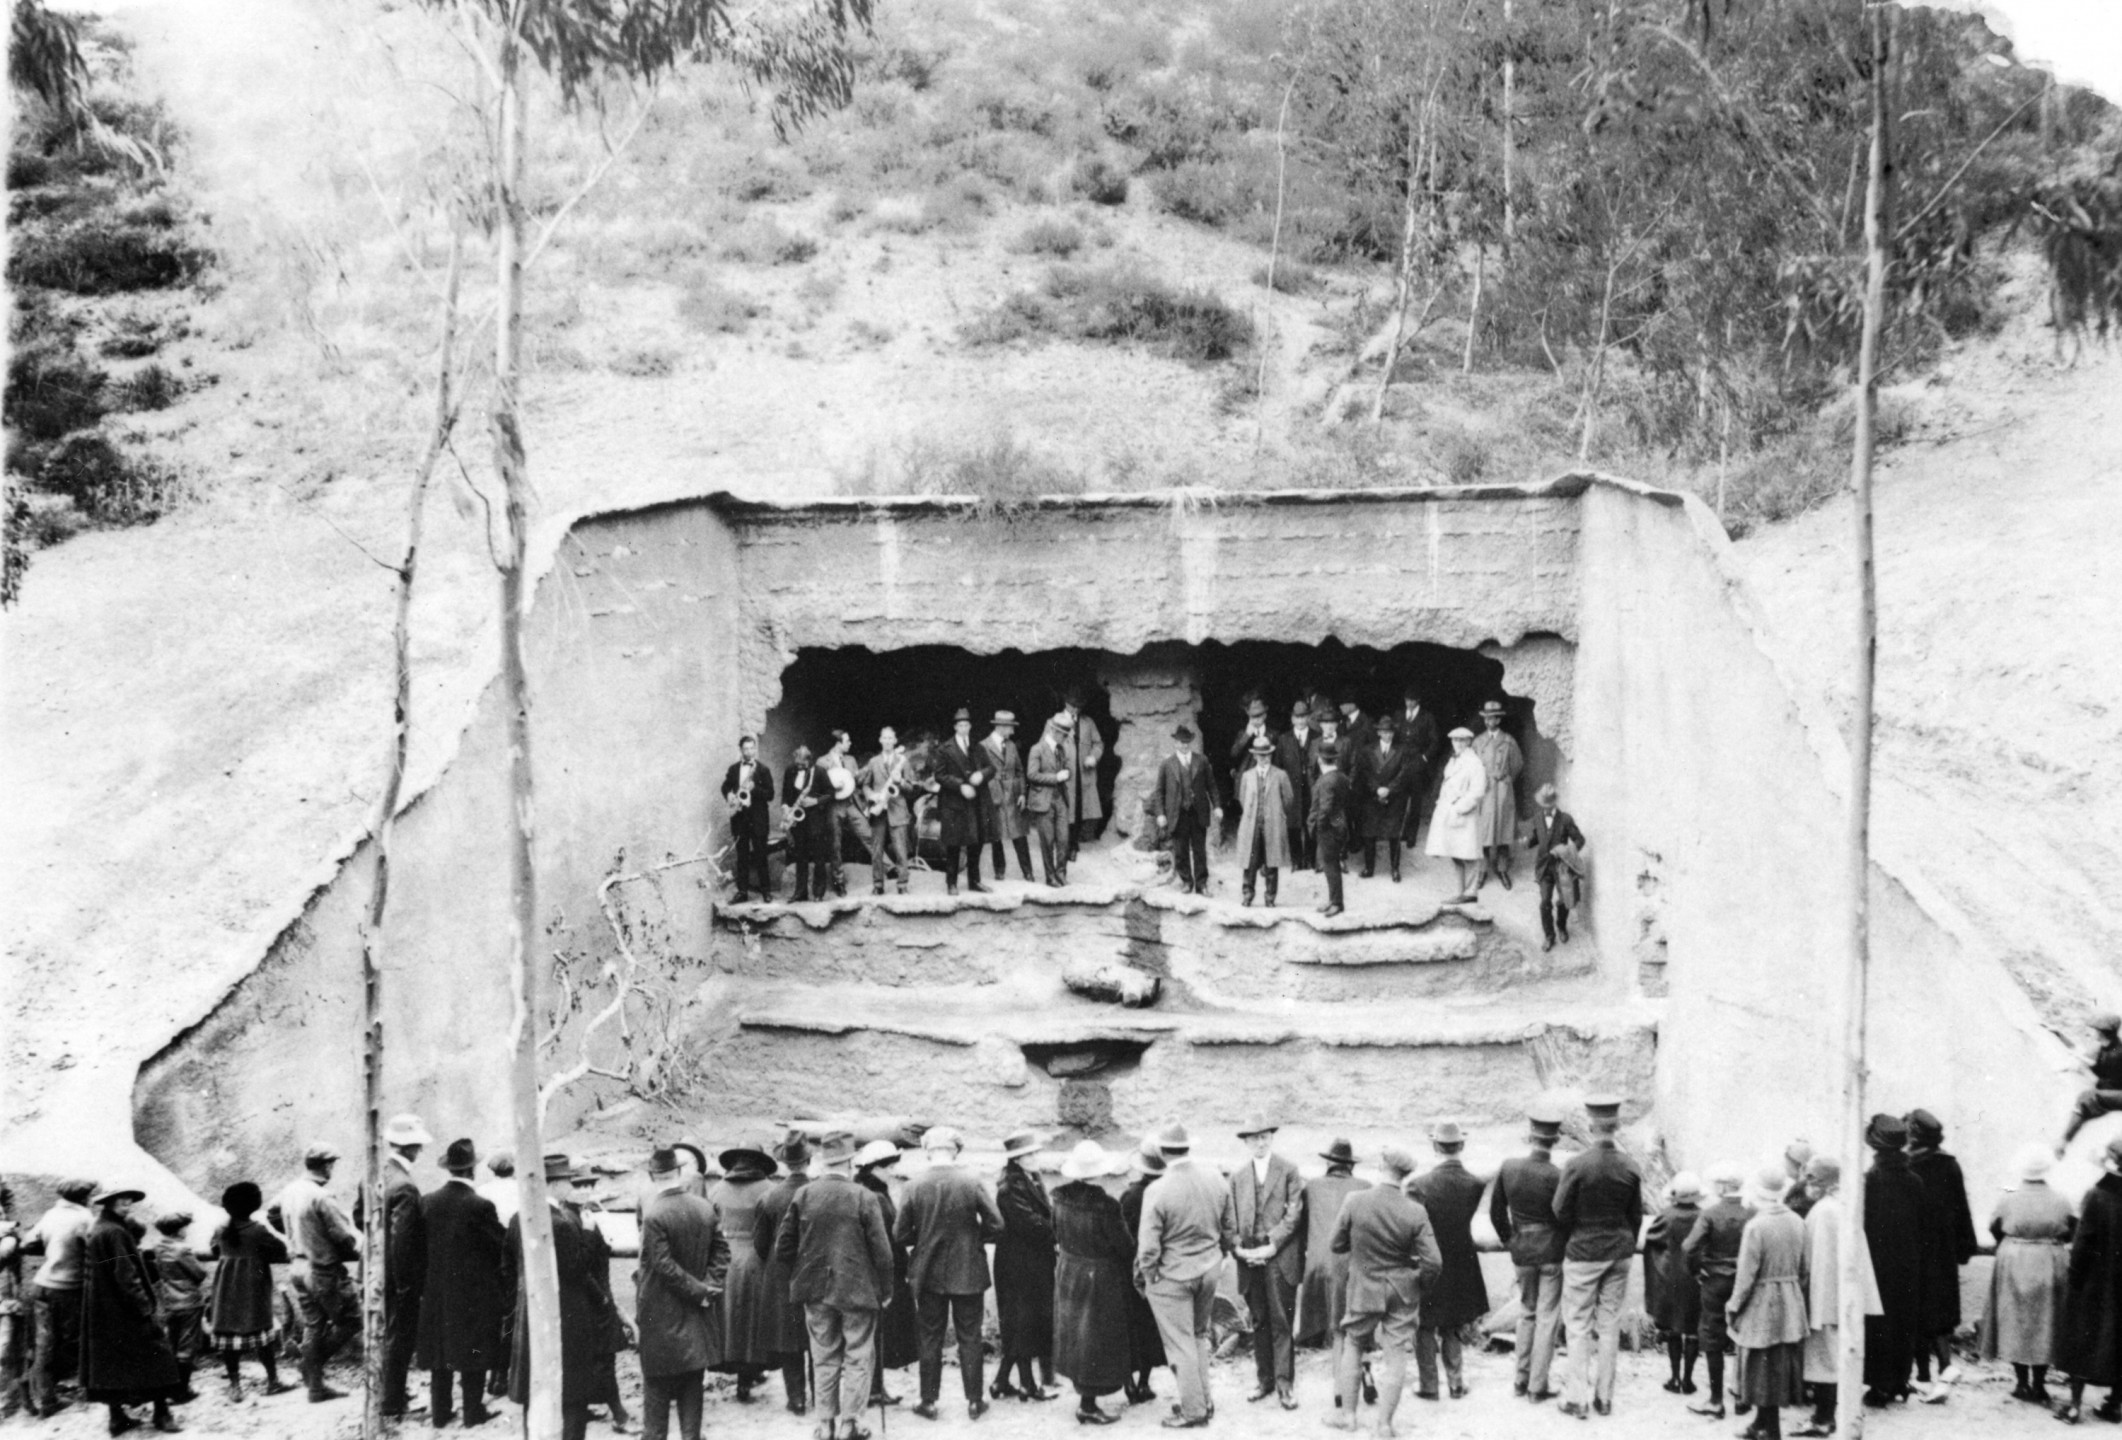 Opening ceremony for the Lion Grotto